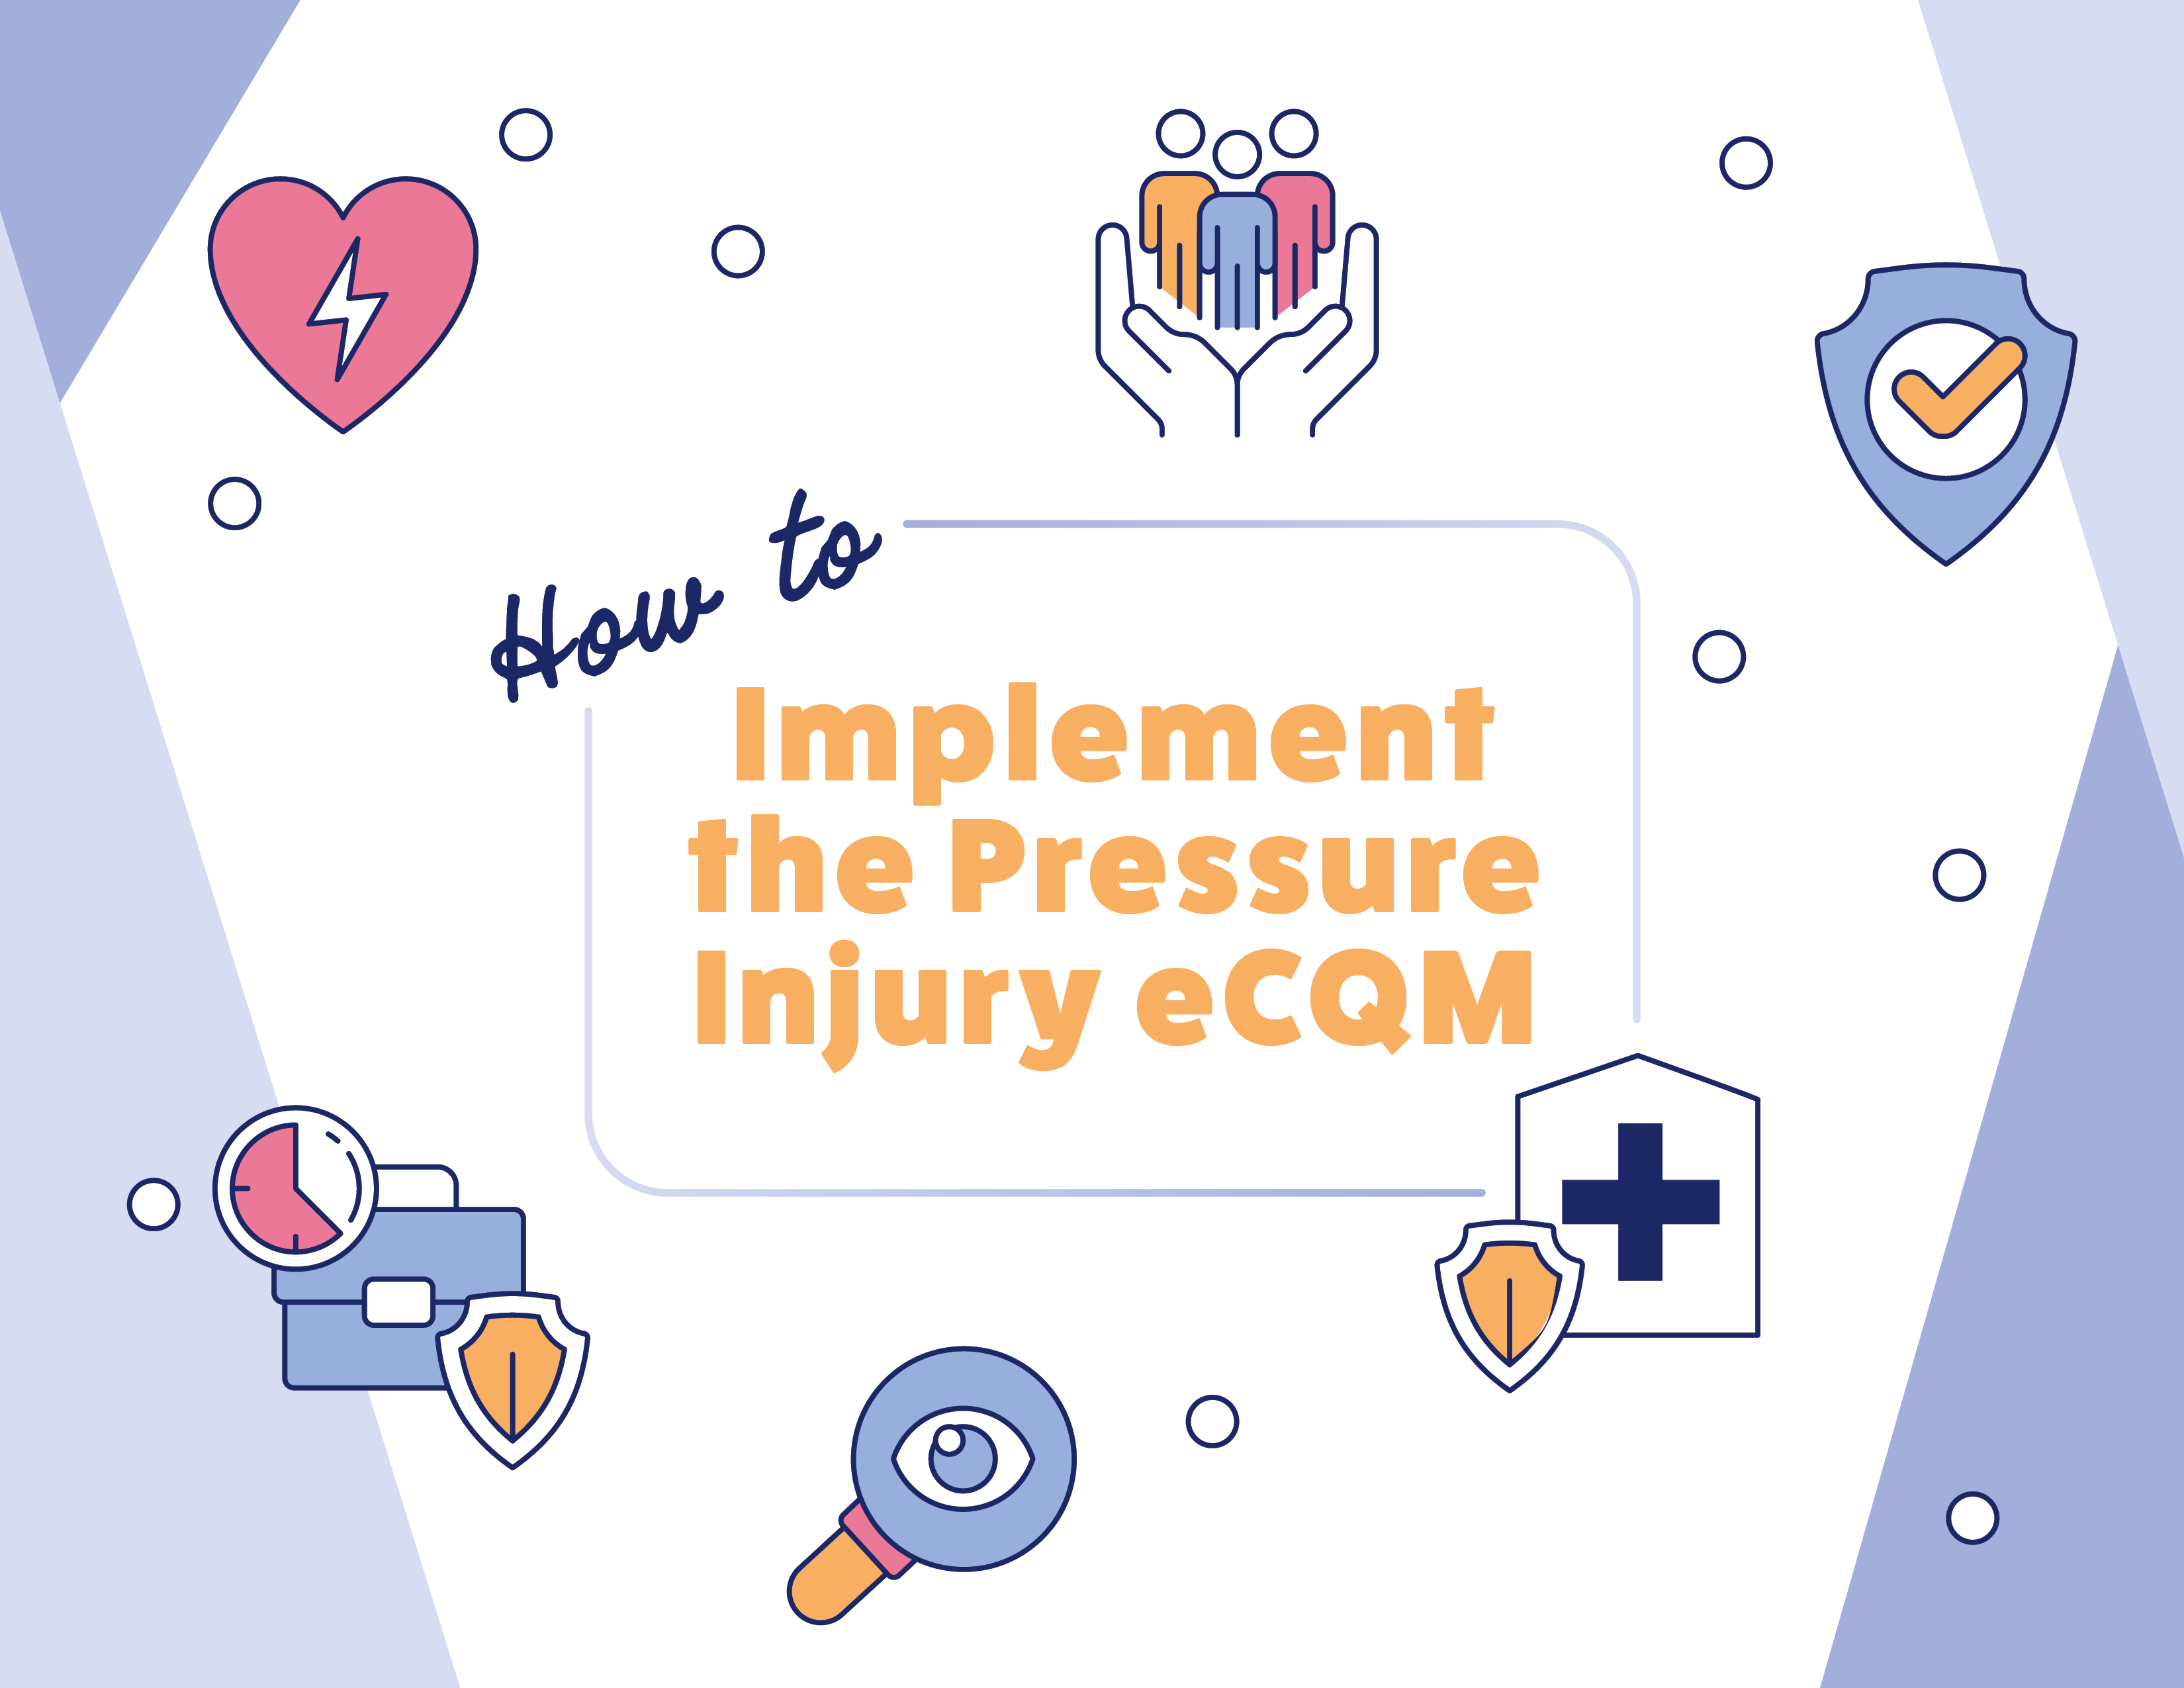 How to Implement the Pressure Injury eCQM